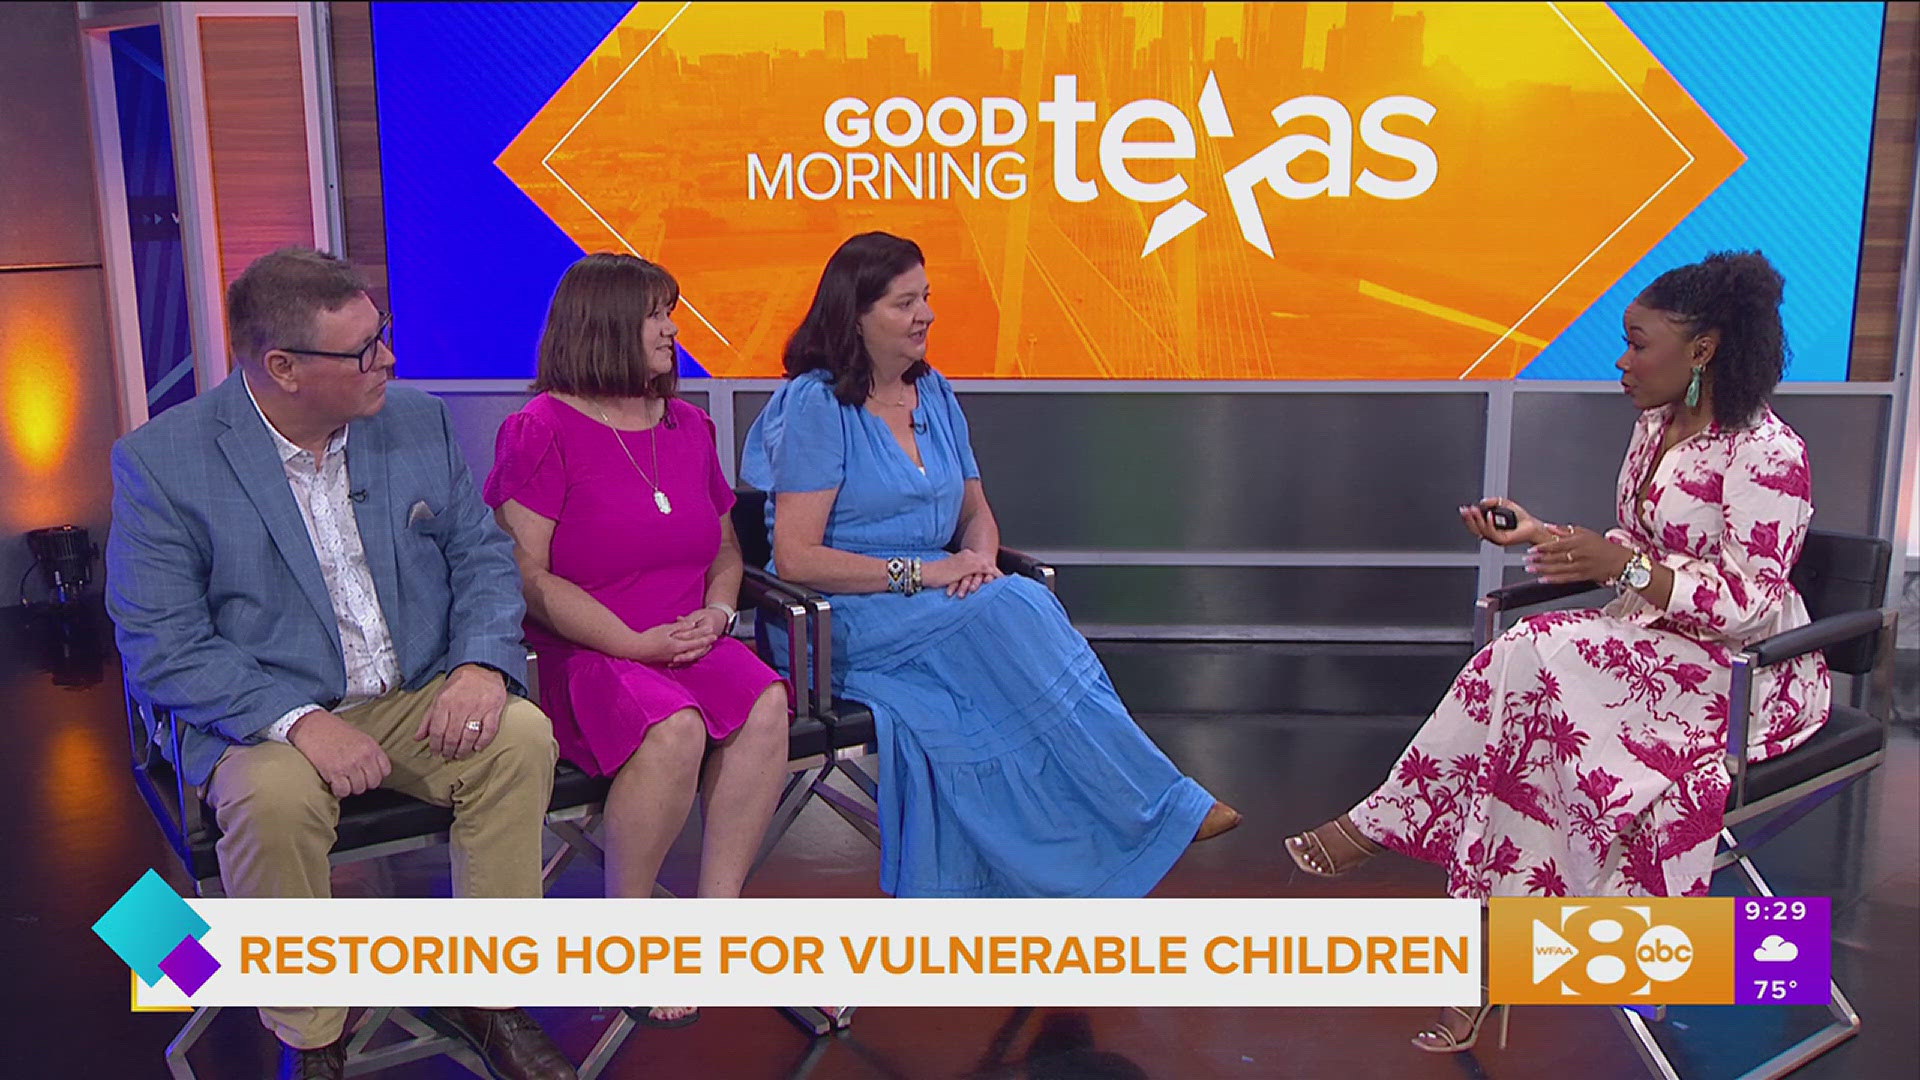 Orphan Outreach Co-Founder Tiffany Taylor Wines and Adoptive Parents Rob and Jennifer Clements join us to share details about the adopting and their upcoming event.